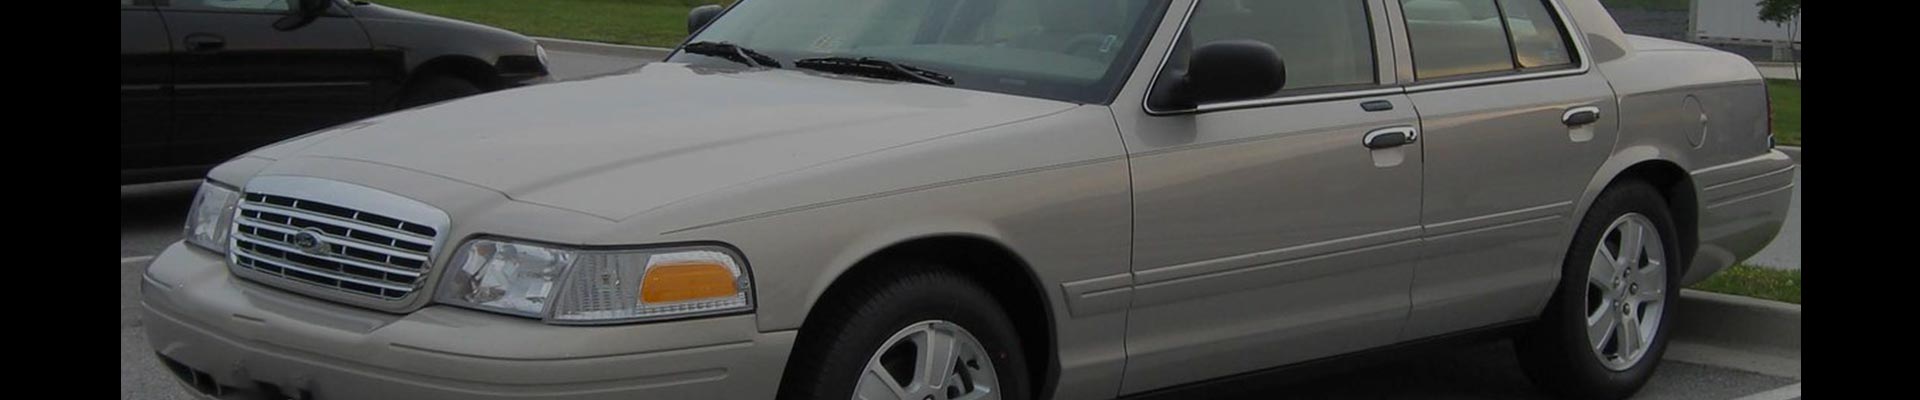 Shop Replacement and OEM 1998 Ford Crown Victoria Parts with Discounted Price on the Net